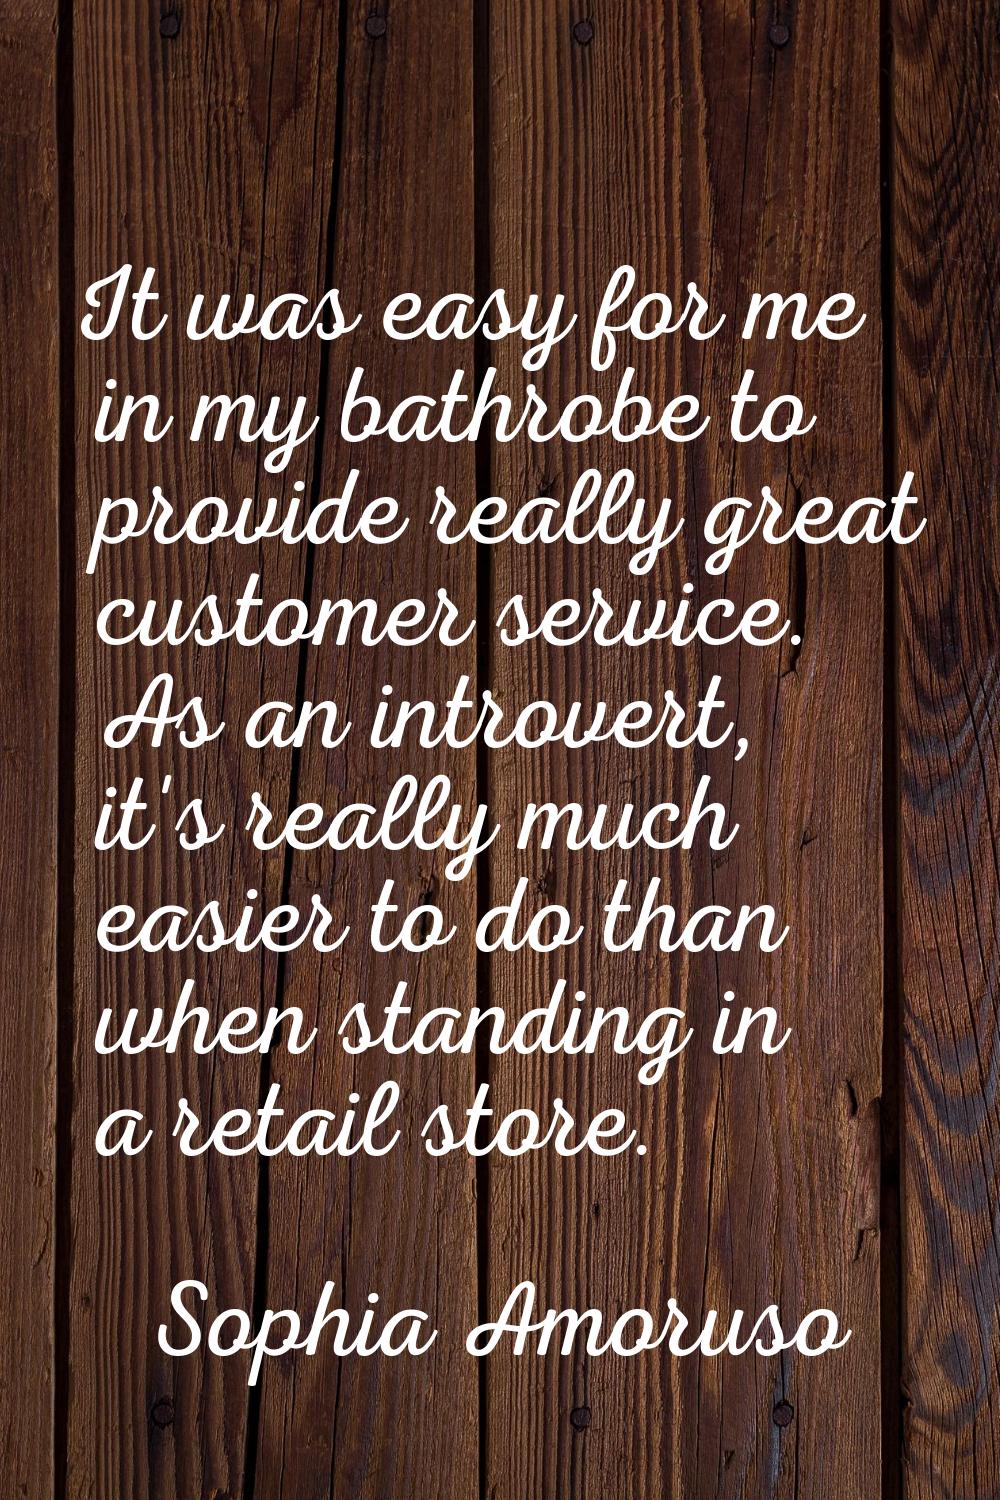 It was easy for me in my bathrobe to provide really great customer service. As an introvert, it's r